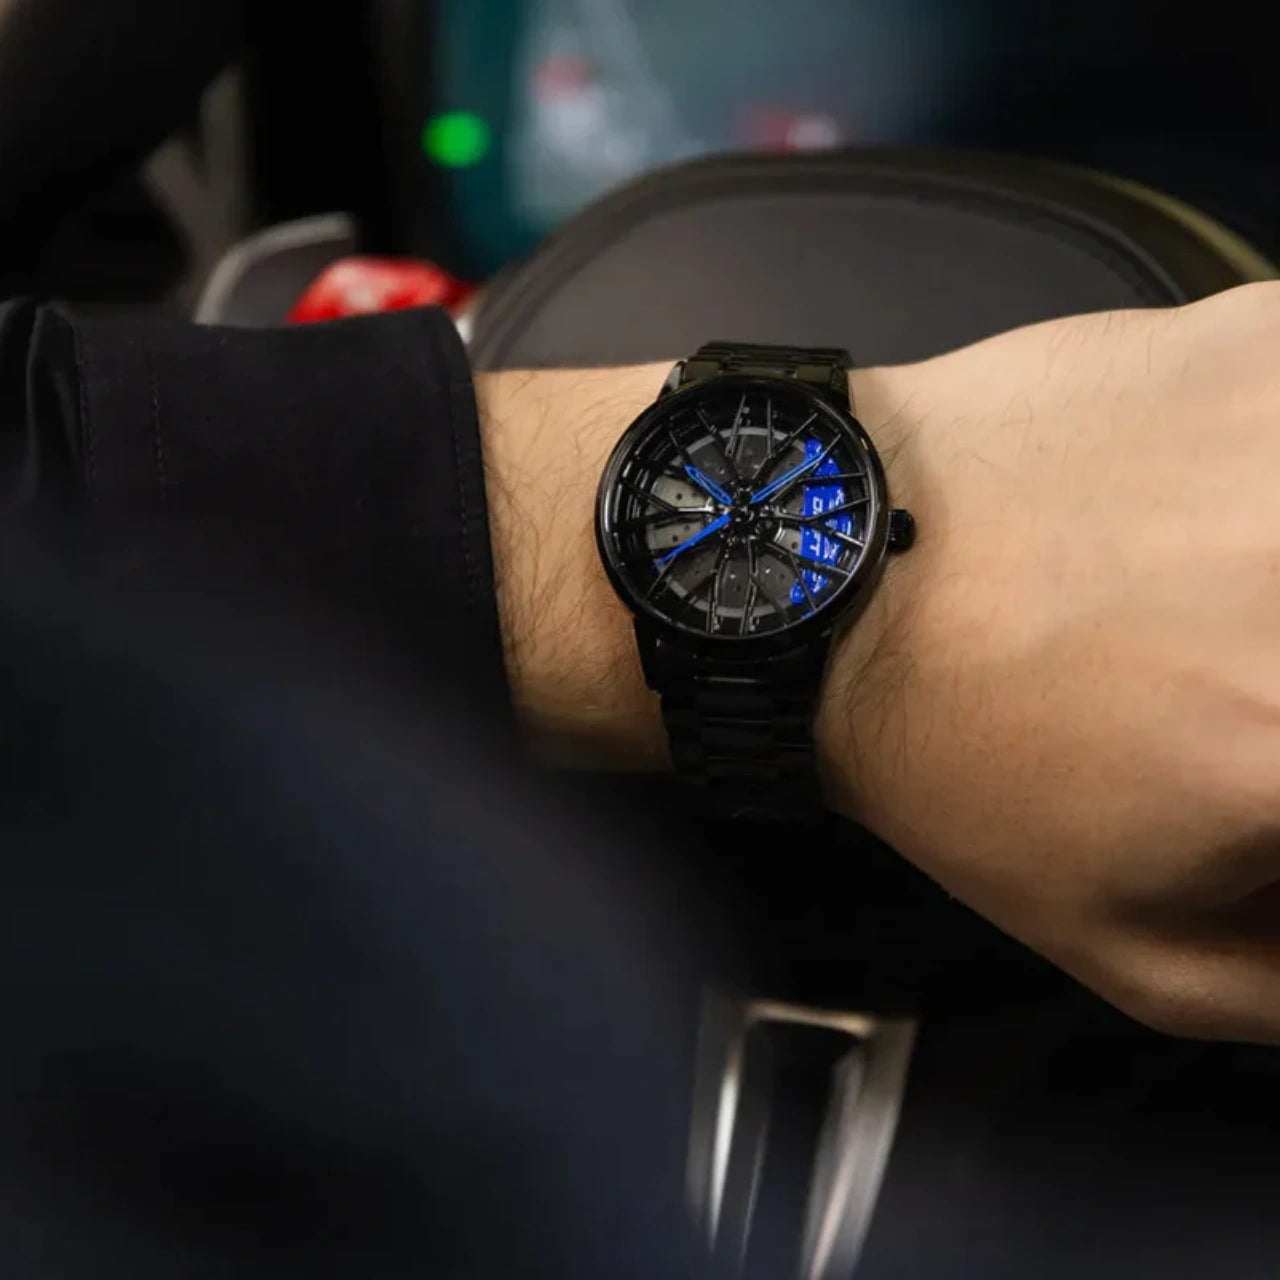 Rev up your style with our innovative blue Motorsport Rim Watch. Crafted by a young German startup, these precision timepieces are designed for motorsport, tuning, and auto enthusiasts. Fuel your passion! #id_46744363008330